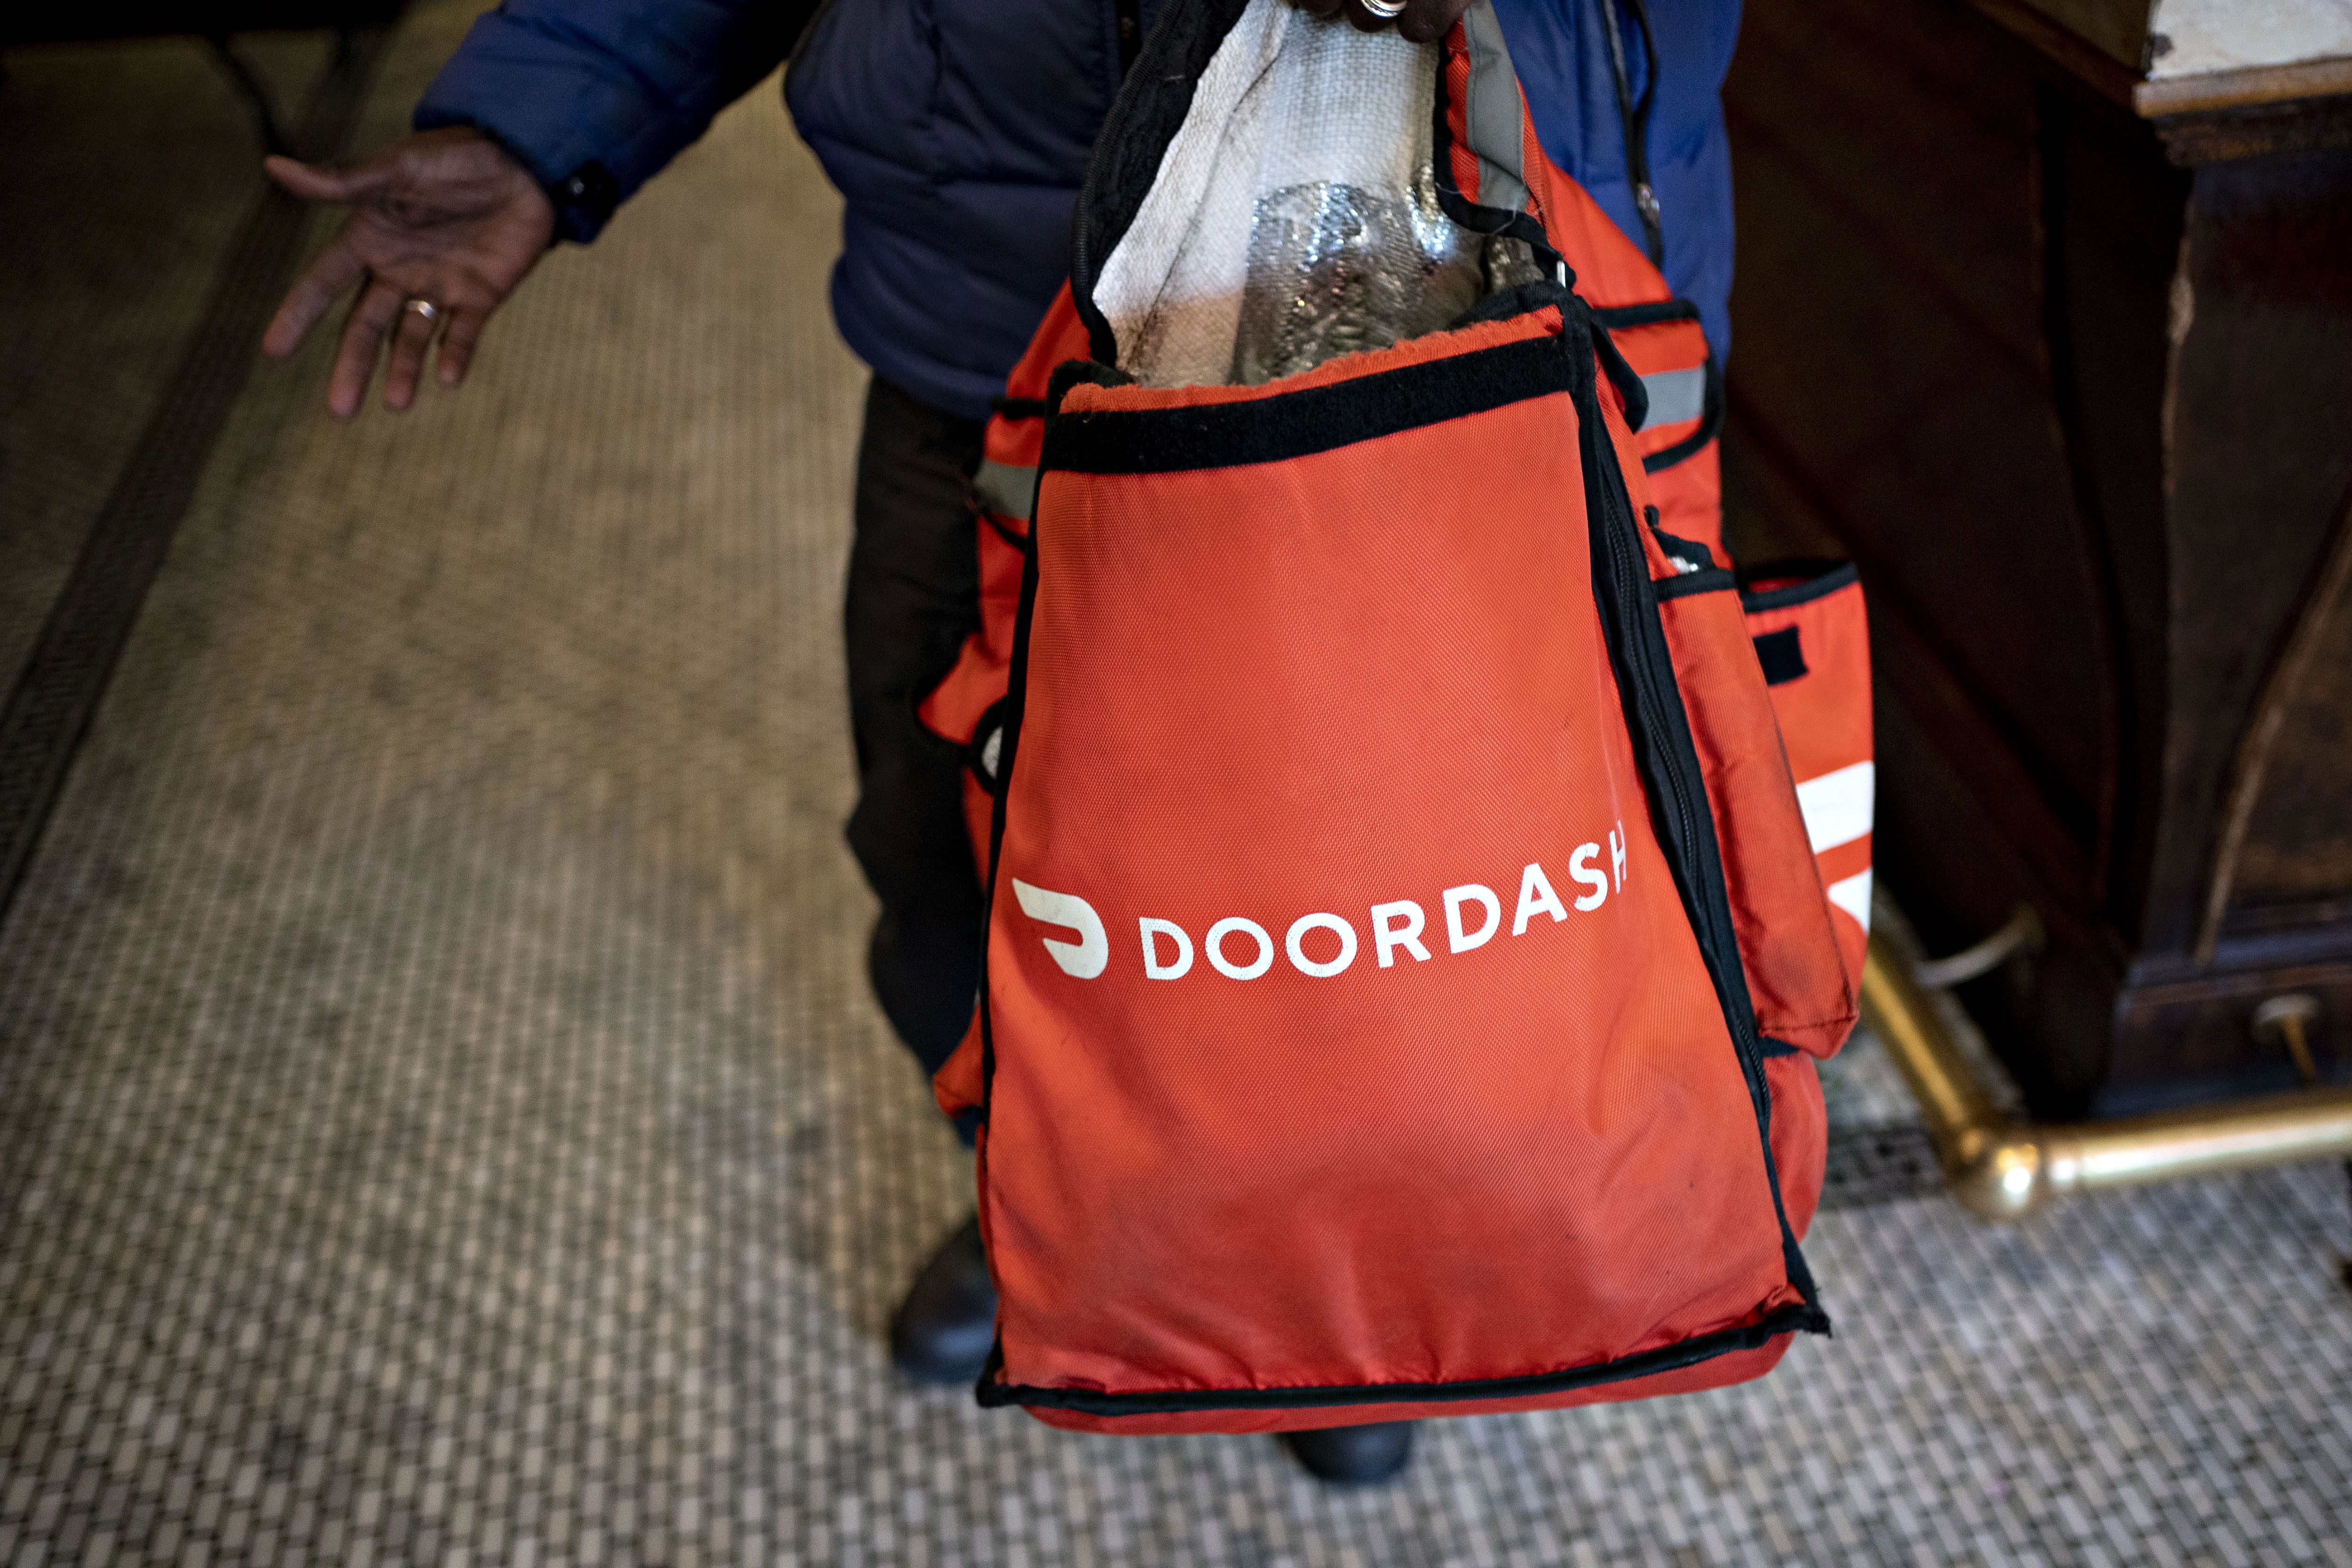 DoorDash Introduces Search-Page Ads for Restaurants - WSJ